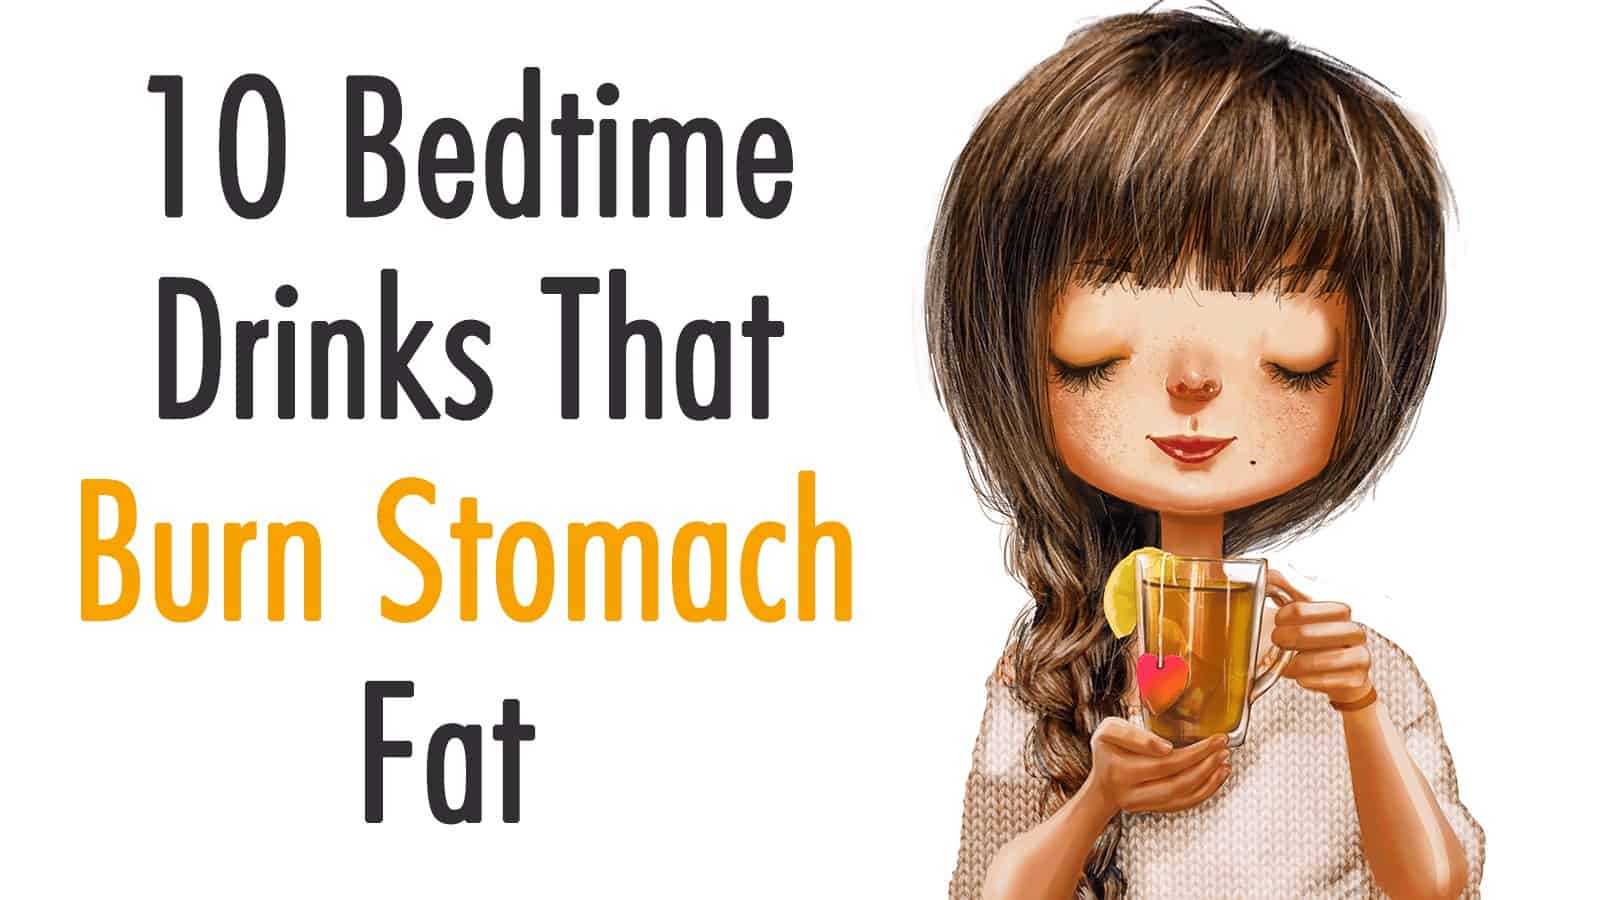 10 Bedtime Drinks That Burn Stomach Fat